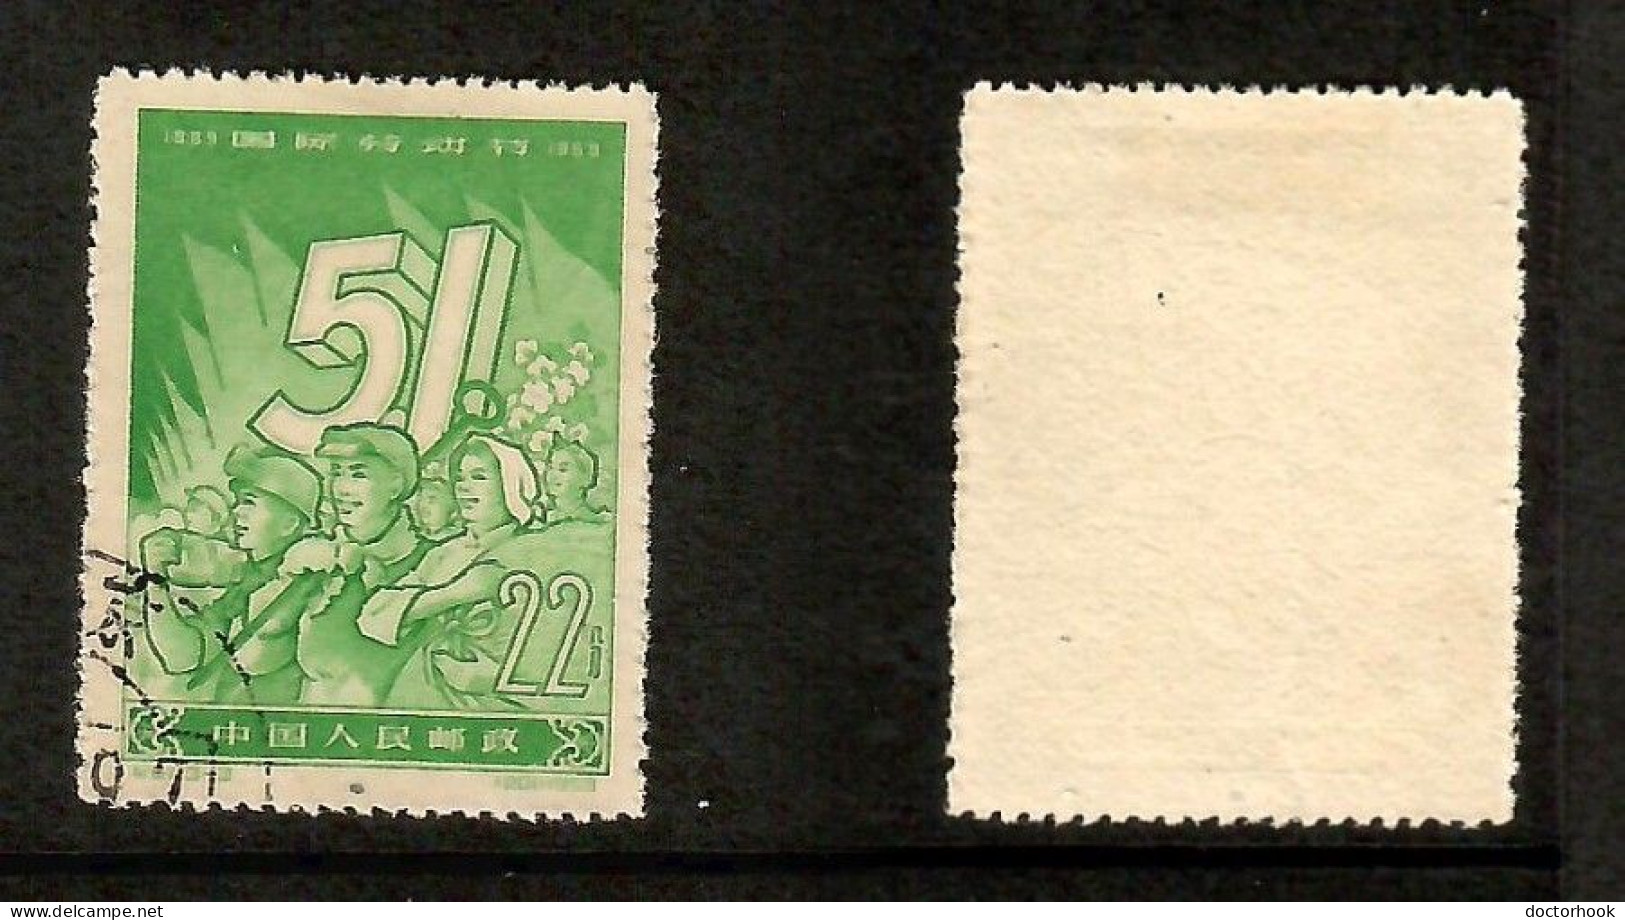 PEOPLES REPUBLIC Of CHINA   Scott # 415 USED (CONDITION AS PER SCAN) (Stamp Scan # 1006-12) - Used Stamps